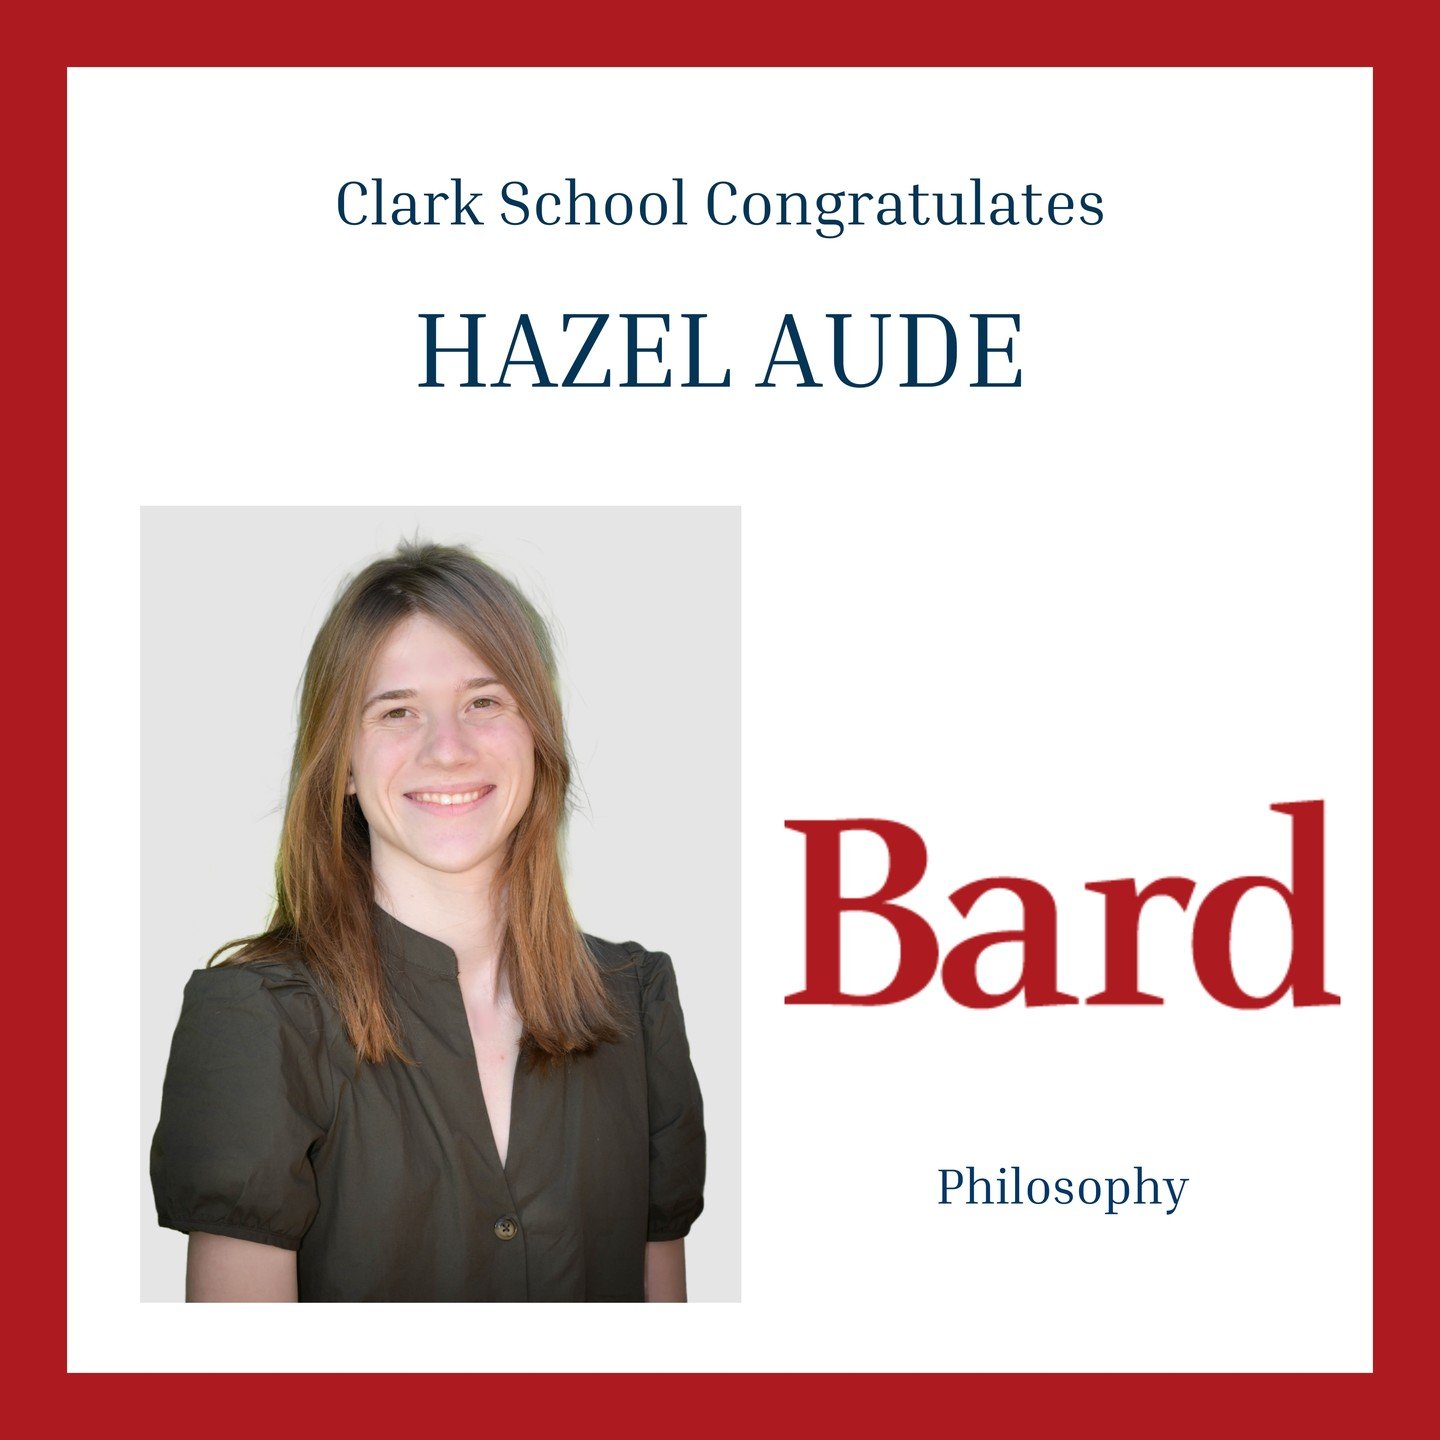 Clark School Congratulates Hazel!
Accepted to bardcollege with a focus in Philosophy!